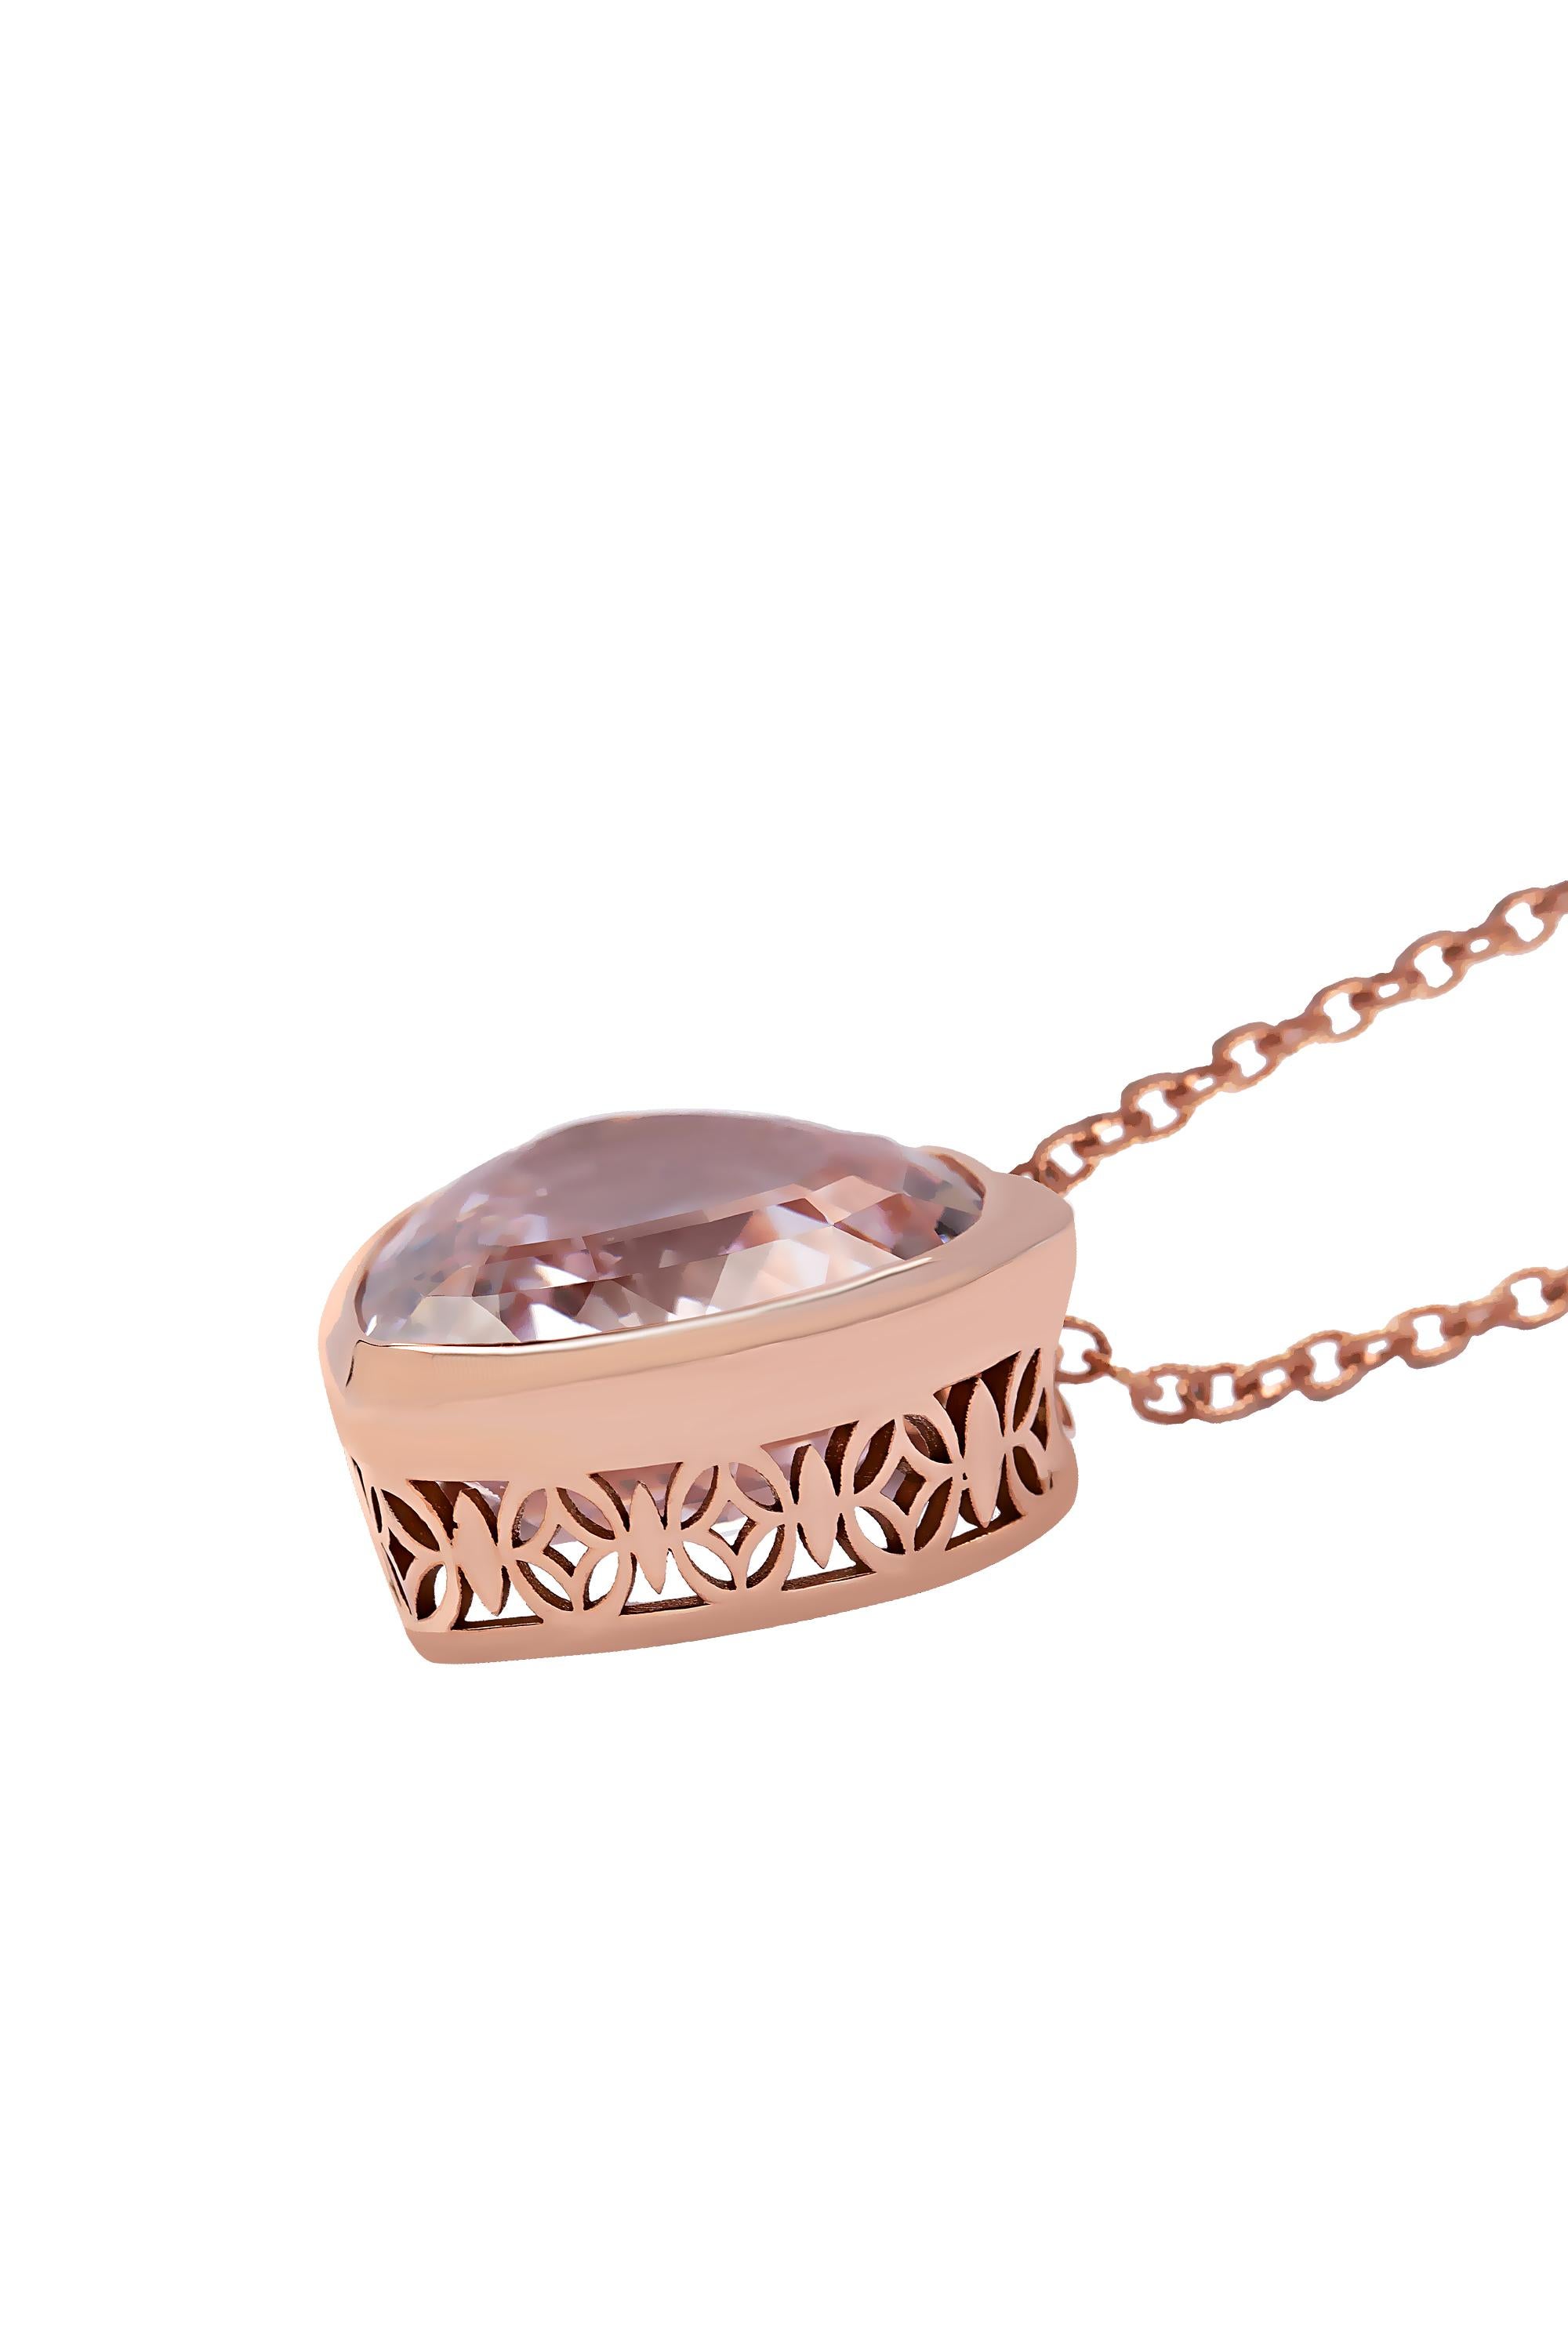 A pale pink kunzite heart weighing an impressive 30.86 carats is softly enhanced by a frame of 18 karat rose gold featuring openwork detailing at the base. Completed by an 18 karat rose gold chain.